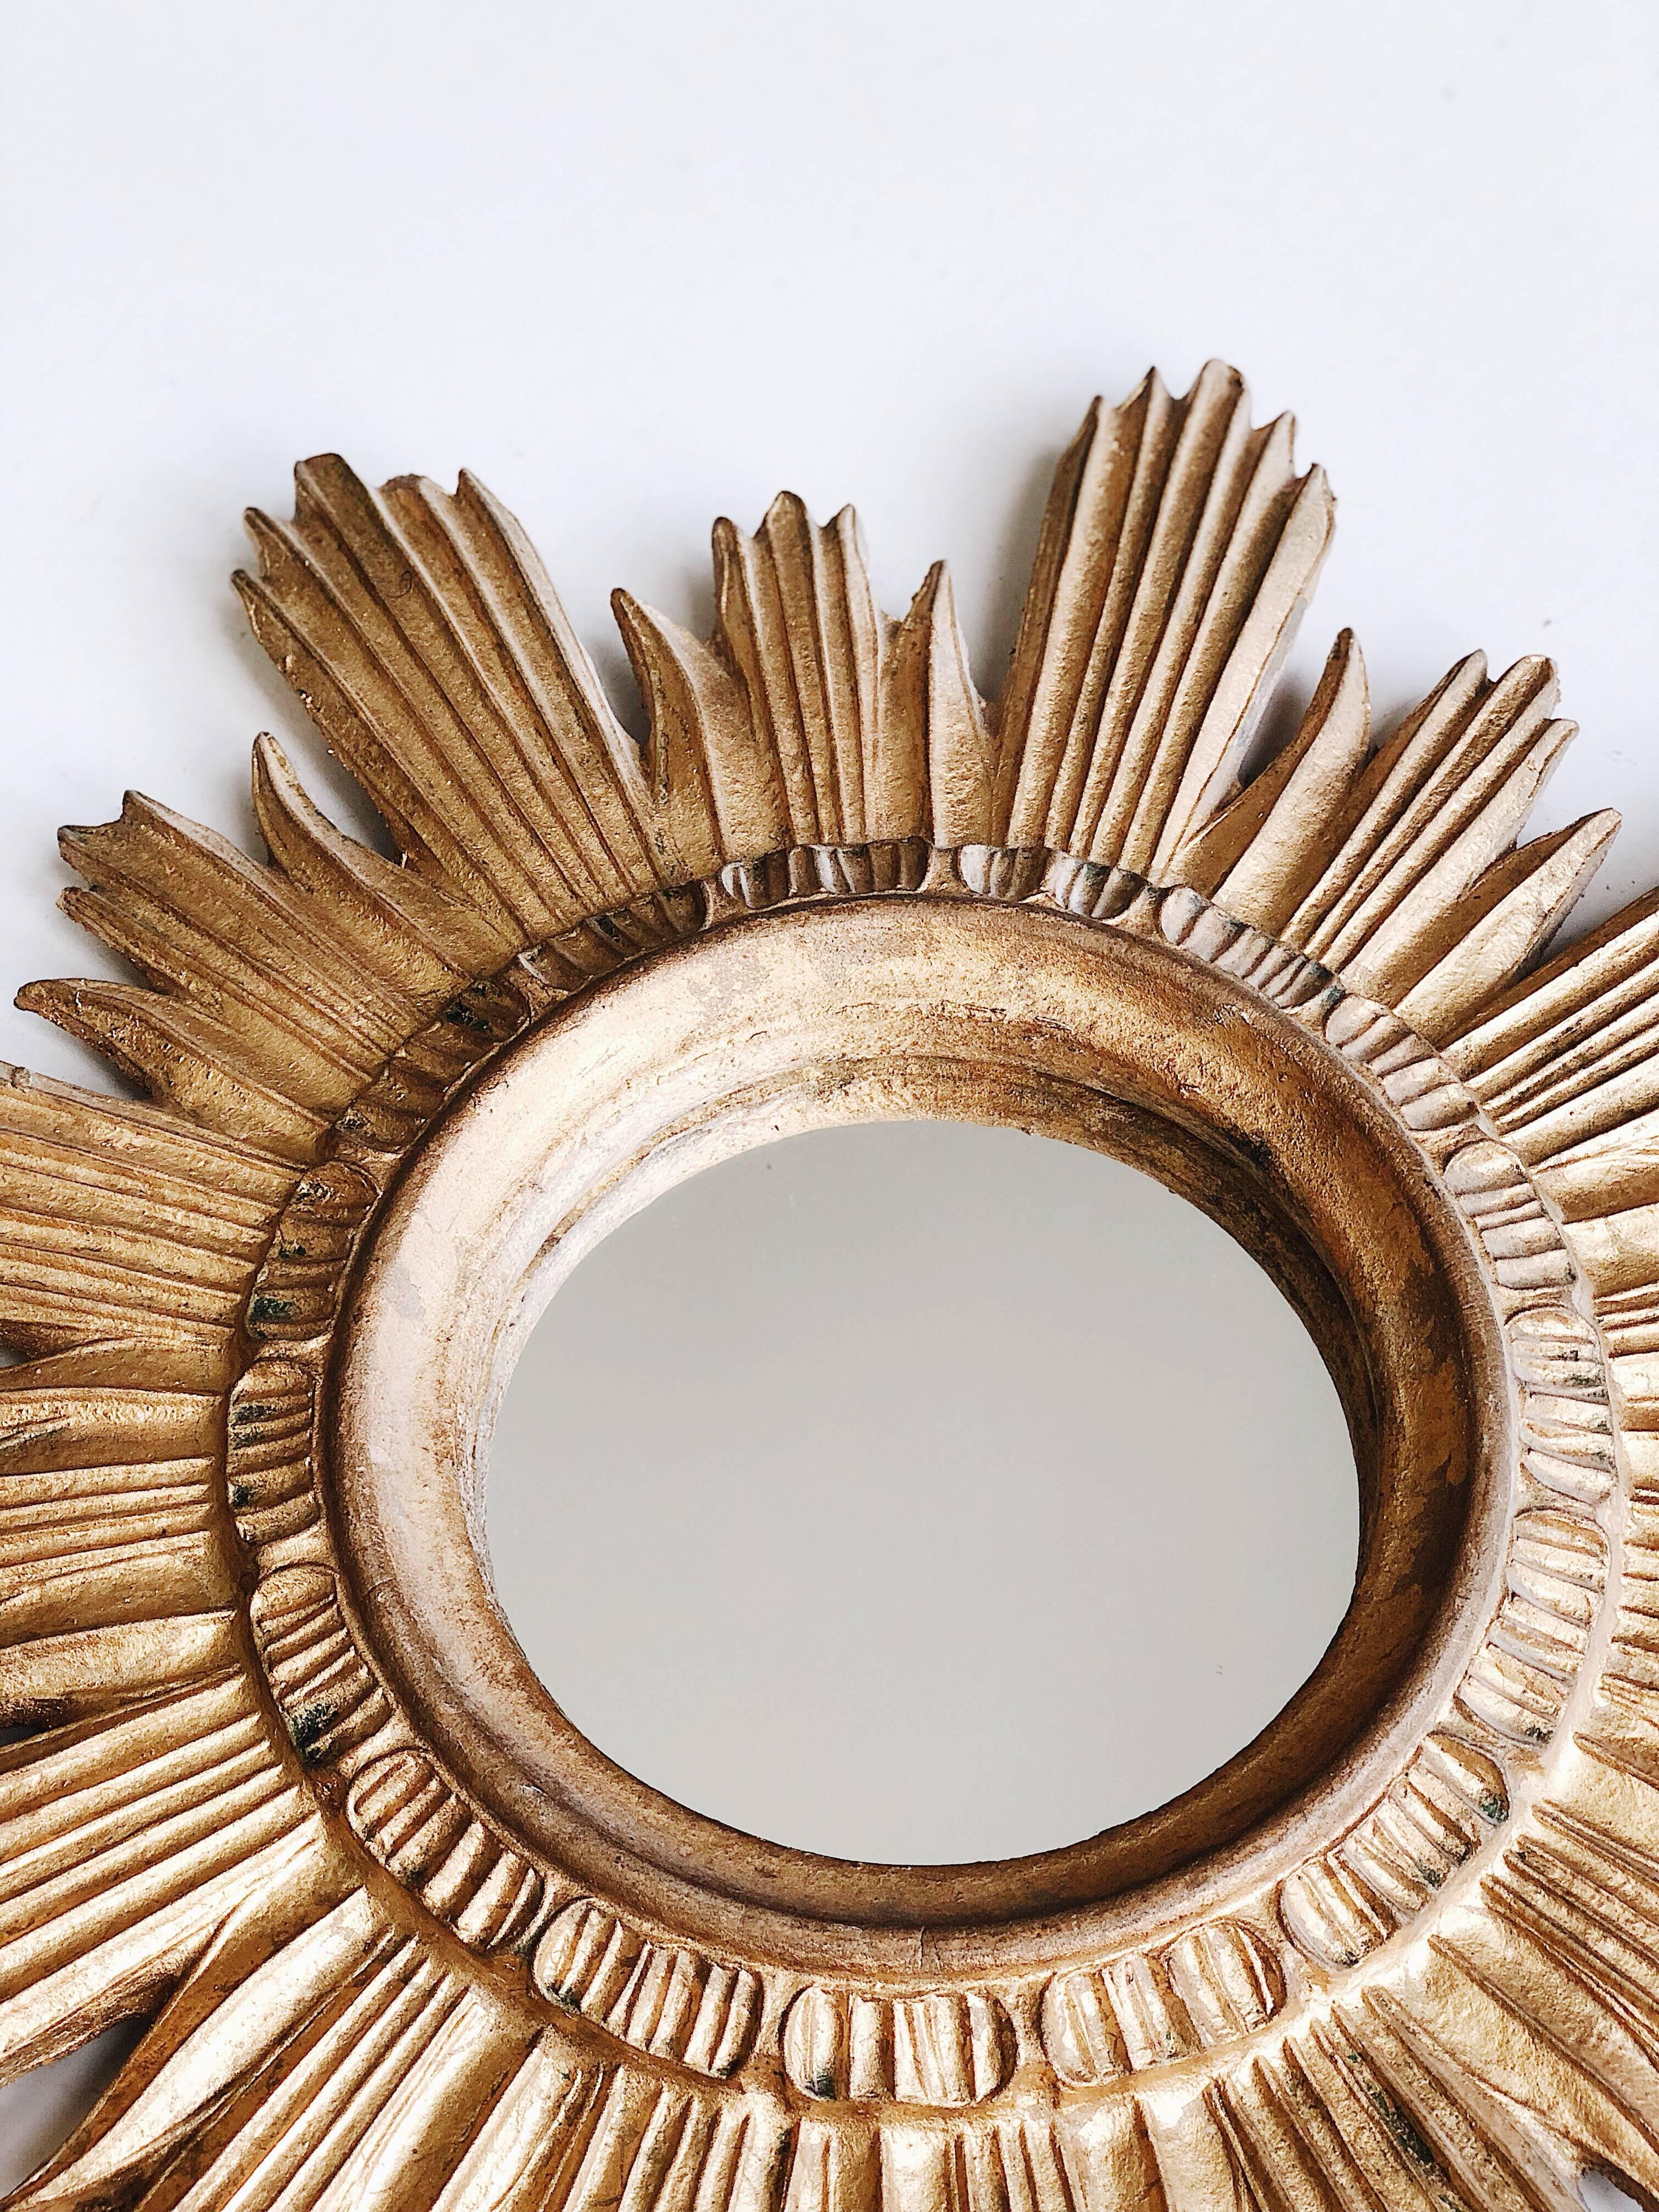 A mirror in a golden decorative sun-shaped frame from Italy. The frame is made of wood. Good condition, no damage or cracks in the frame, the mirror pane has minimal flaws. Beautiful piece for every interior! Free shipping in EU.